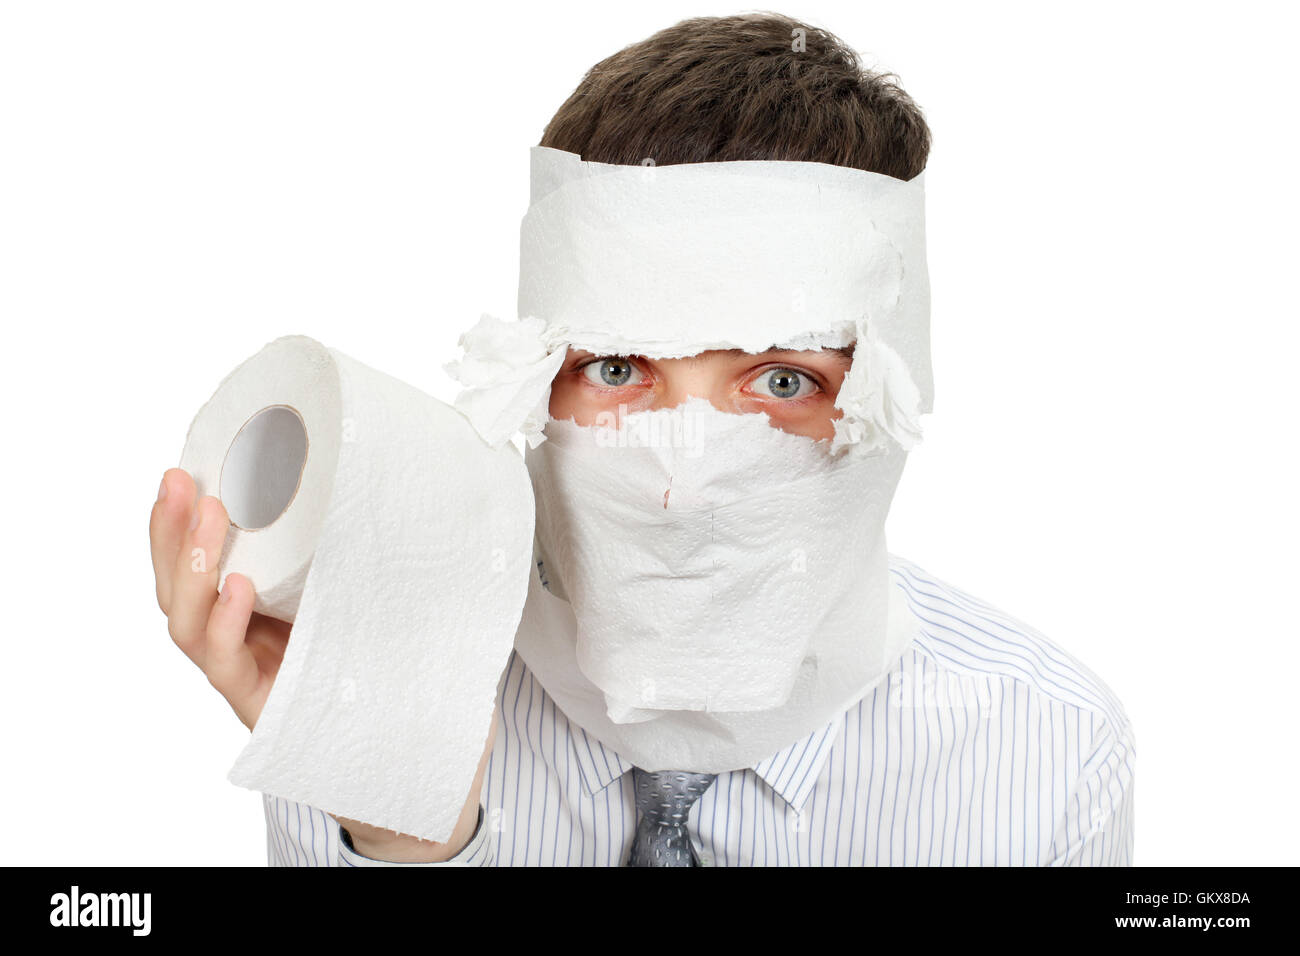 Man With Toilet Paper Stock Photo